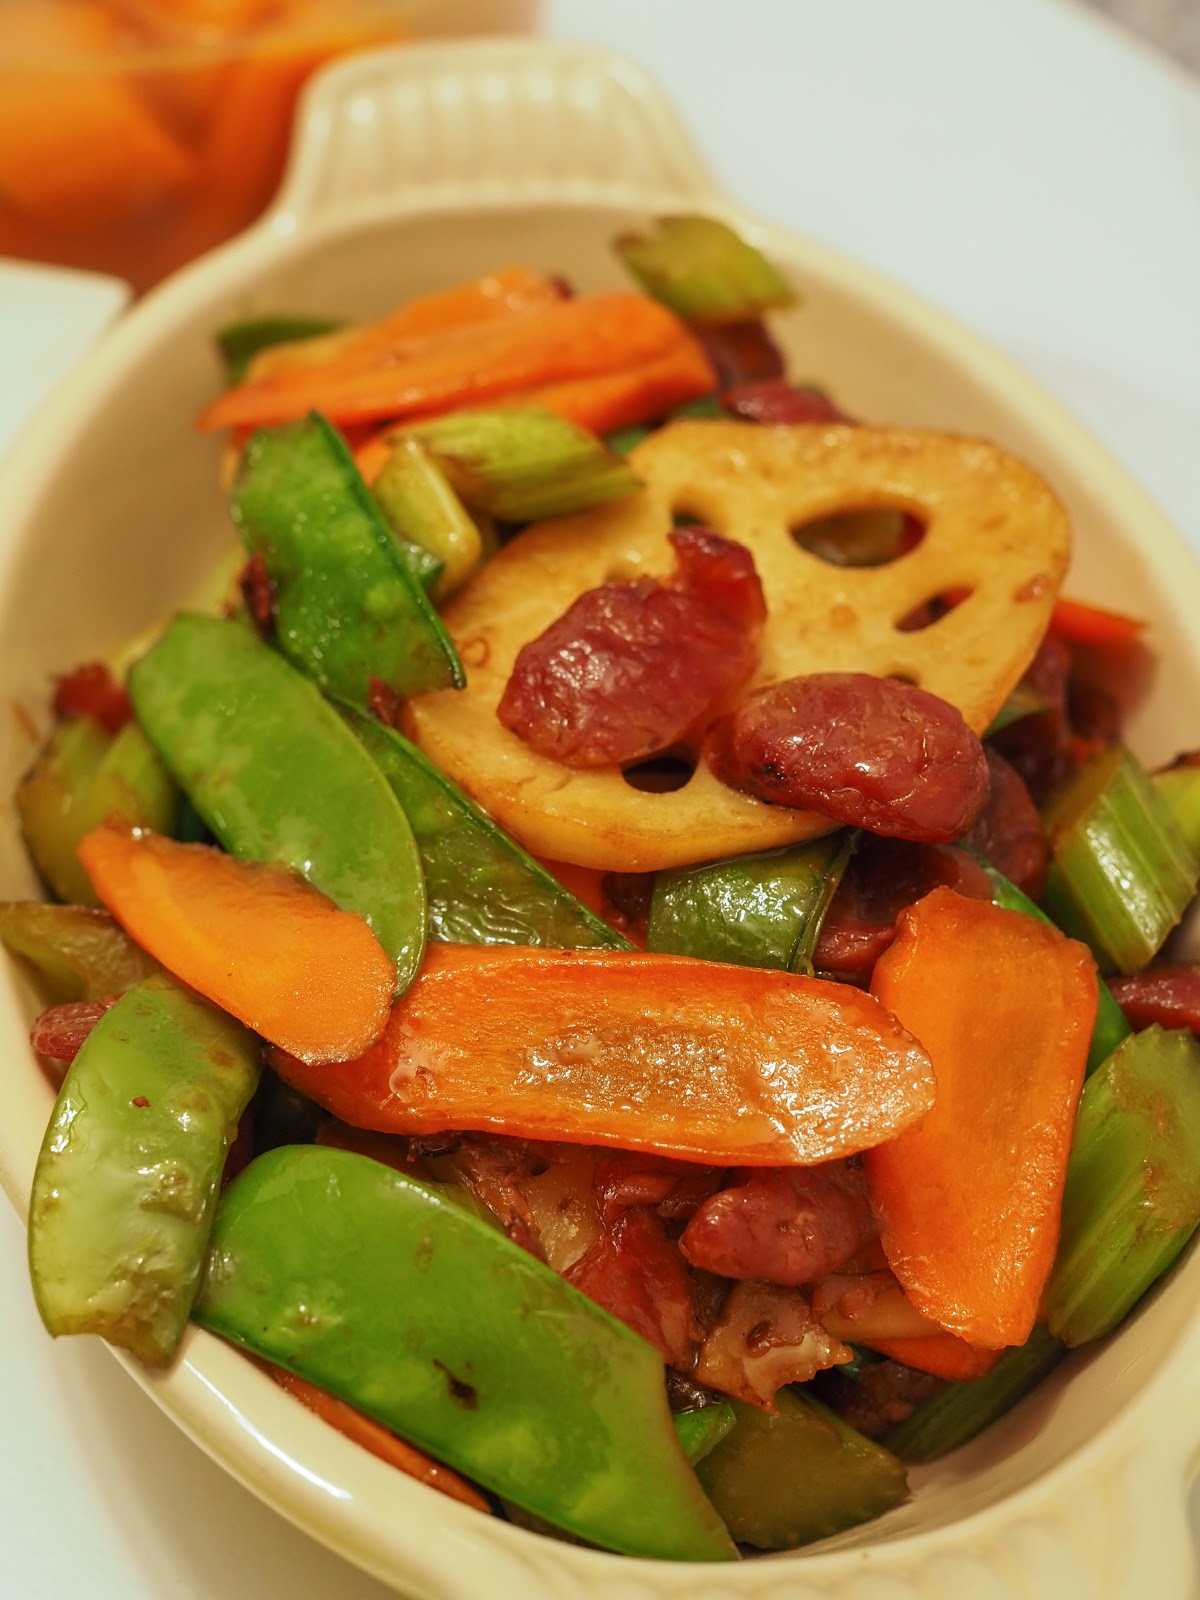 Serving dish containing wok-charred veggies and sliced chinese sausage